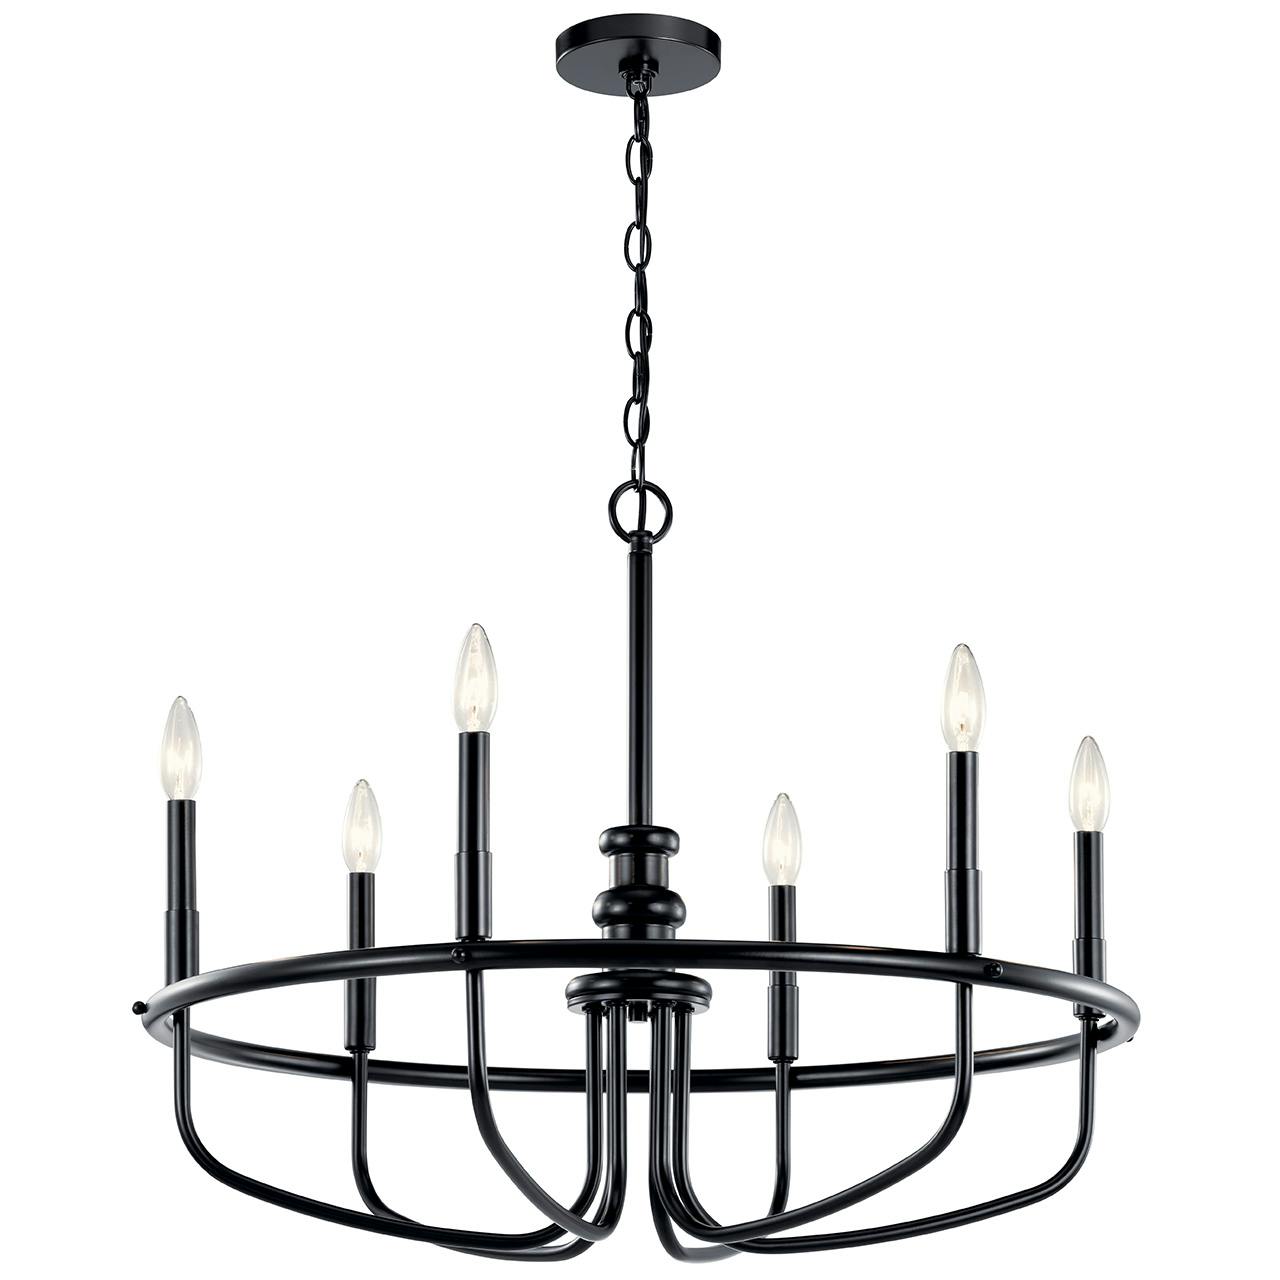 Capitol Hill 22" 6 Light Chandelier Black on a white background